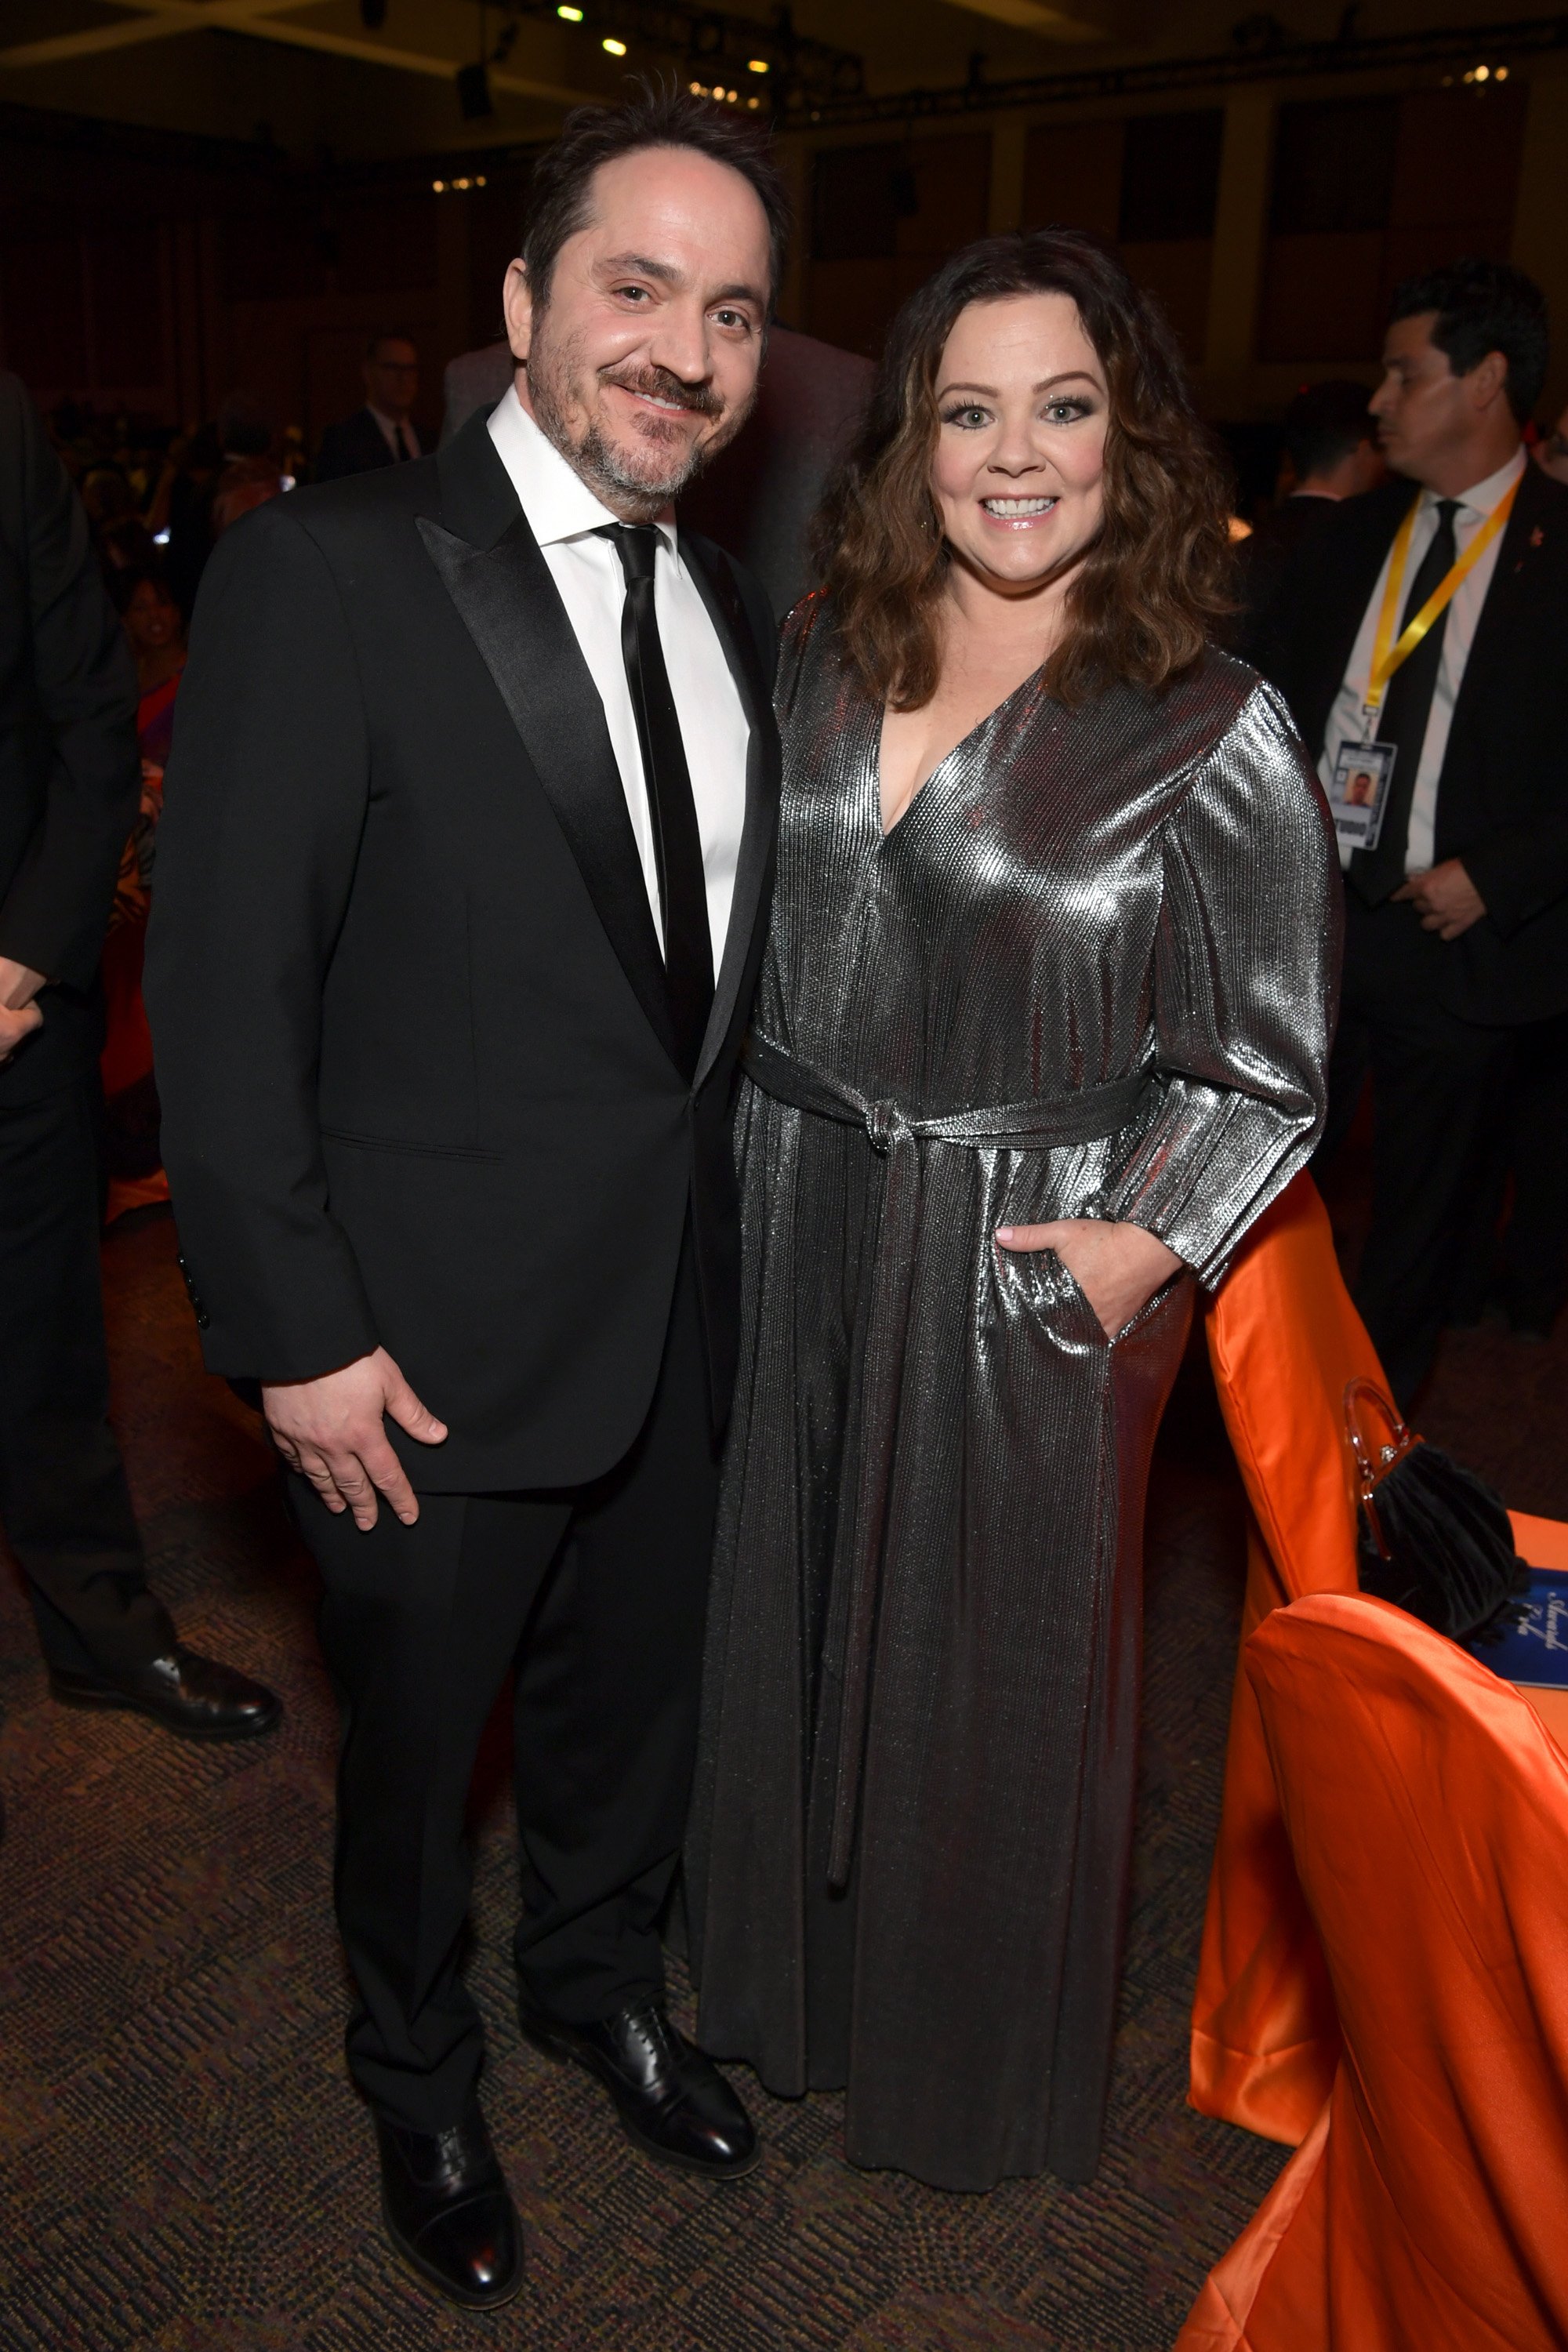 Ben Falcone and Melissa McCarthy attend the 30th Annual Palm Springs International Film Festival Film Awards Gala at Palm Springs Convention Center on January 3, 2019 in Palm Springs, California. | Source: Getty Images